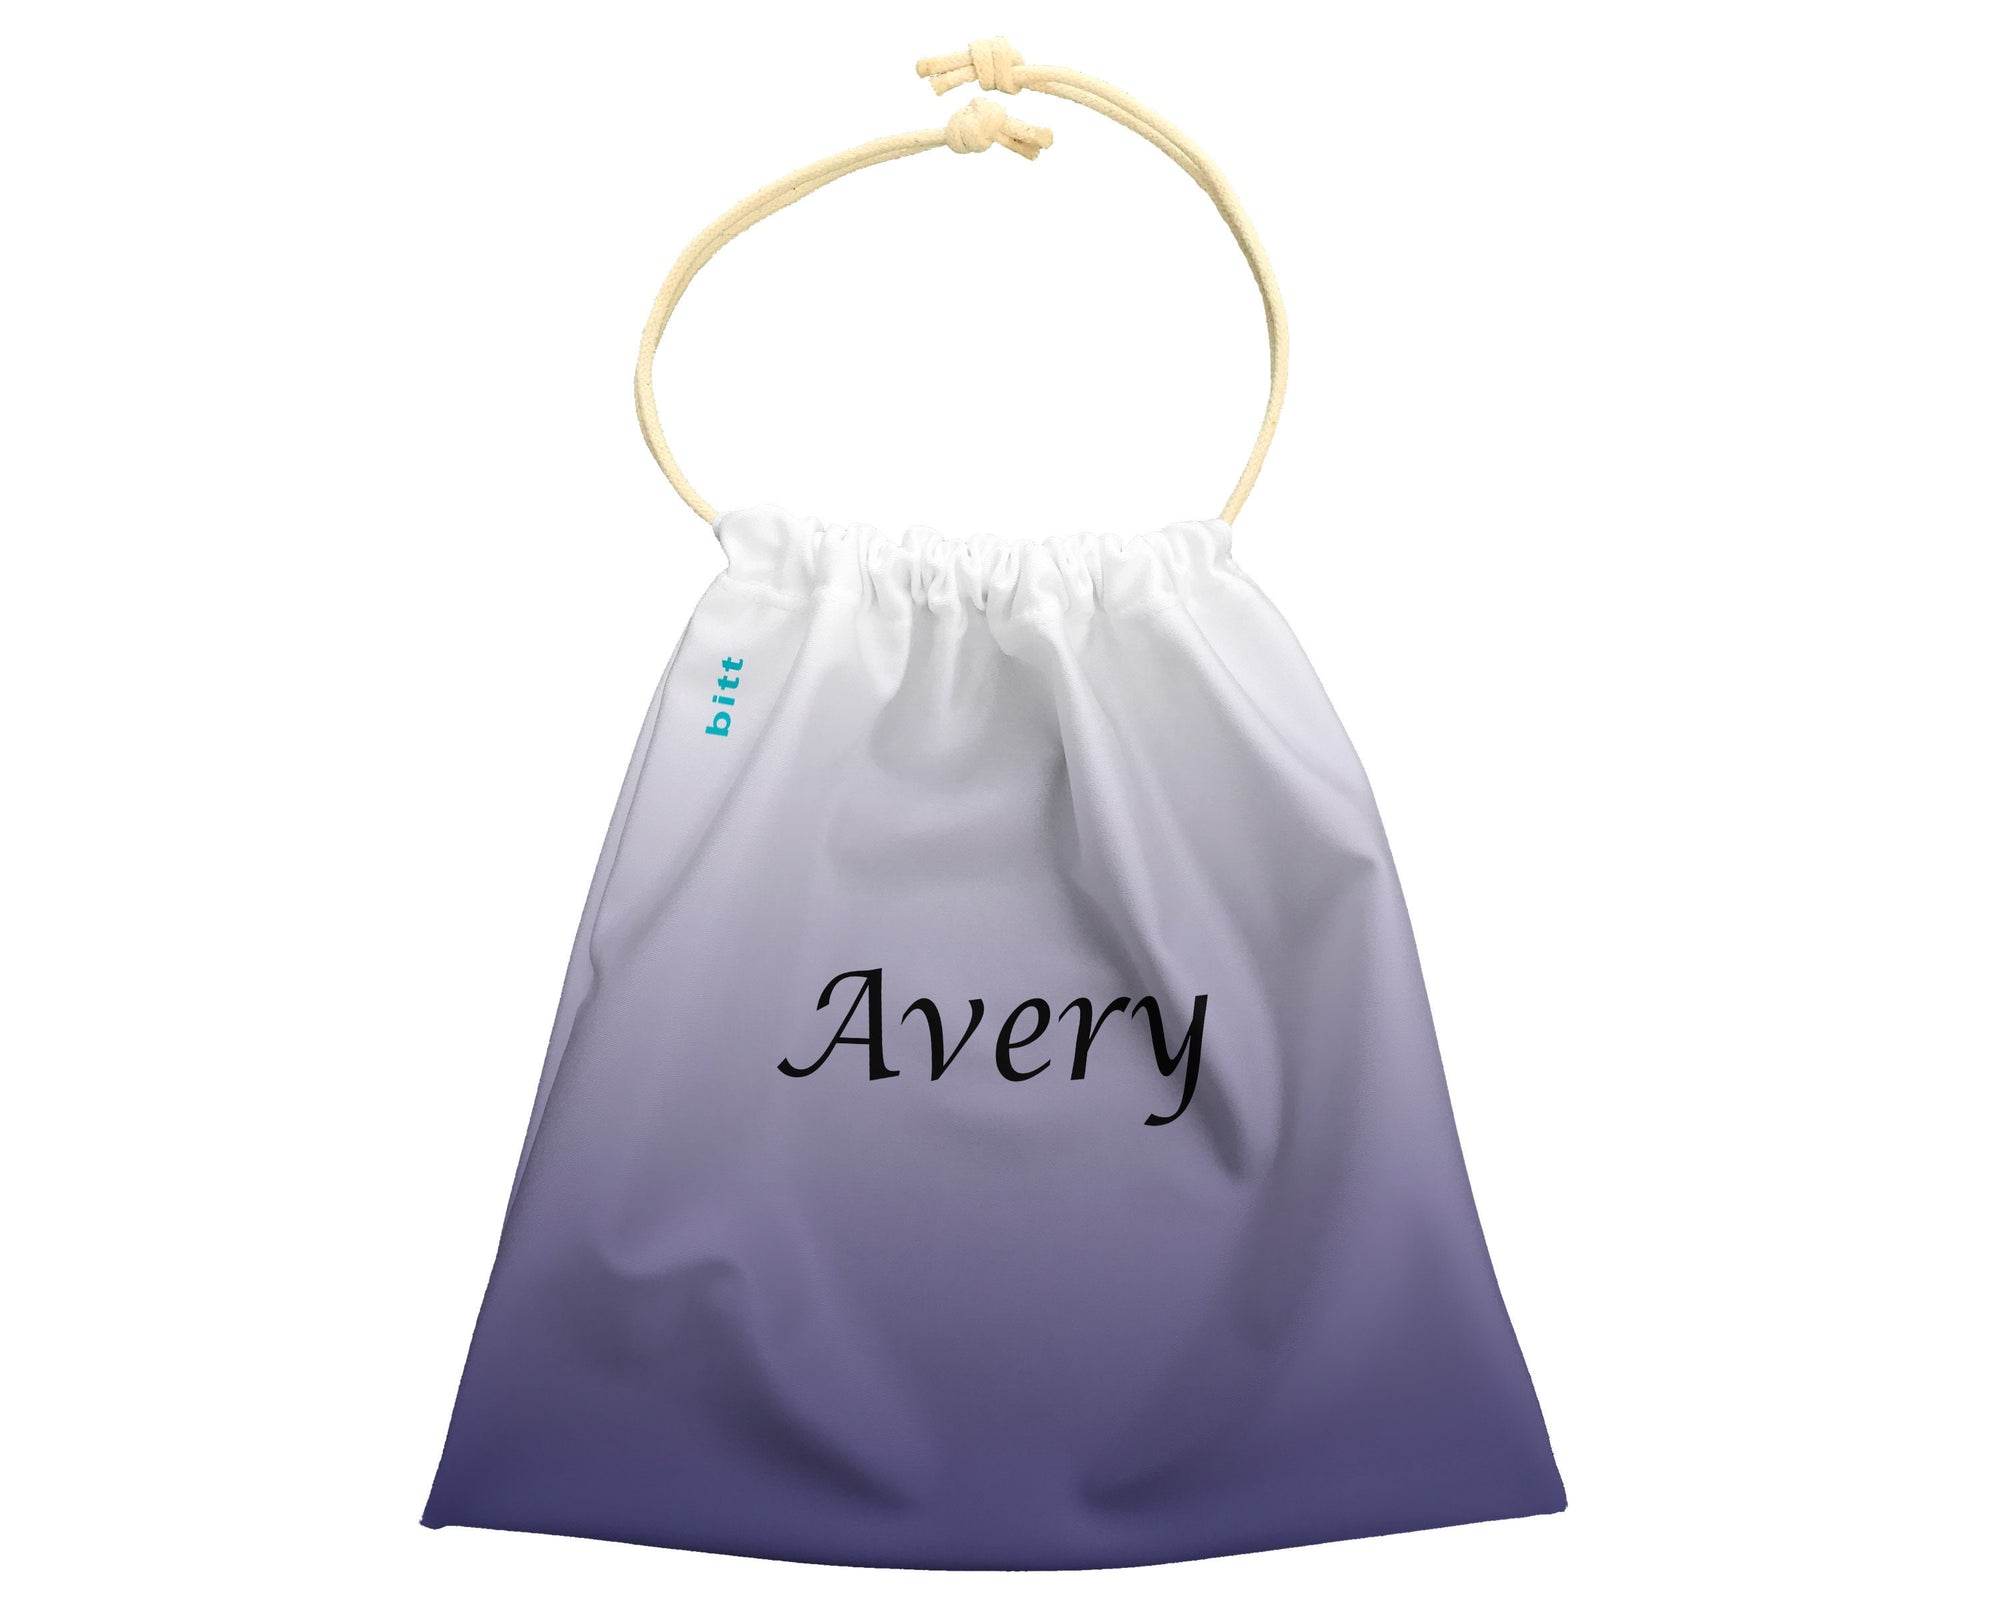 Personalized Gymnastics Grip Bag - Navy Fog and White Ombre